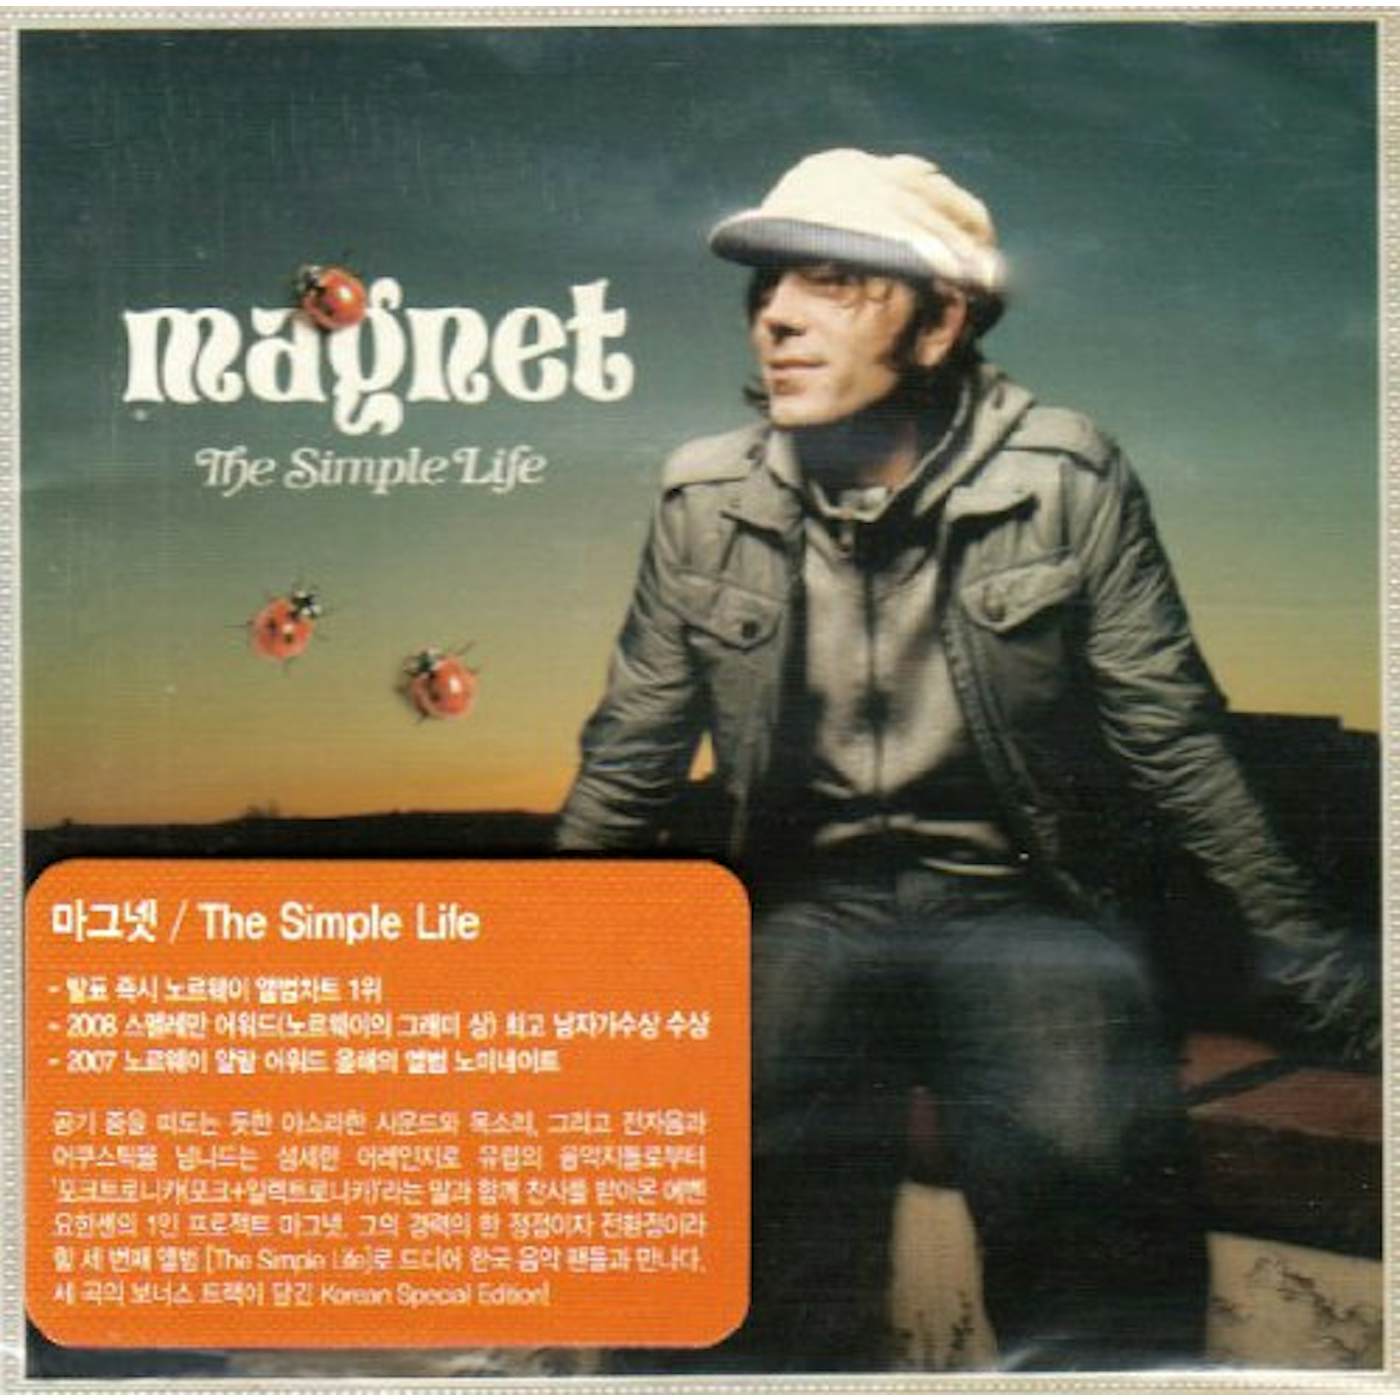 Magnet SIMPLE LIFE CD